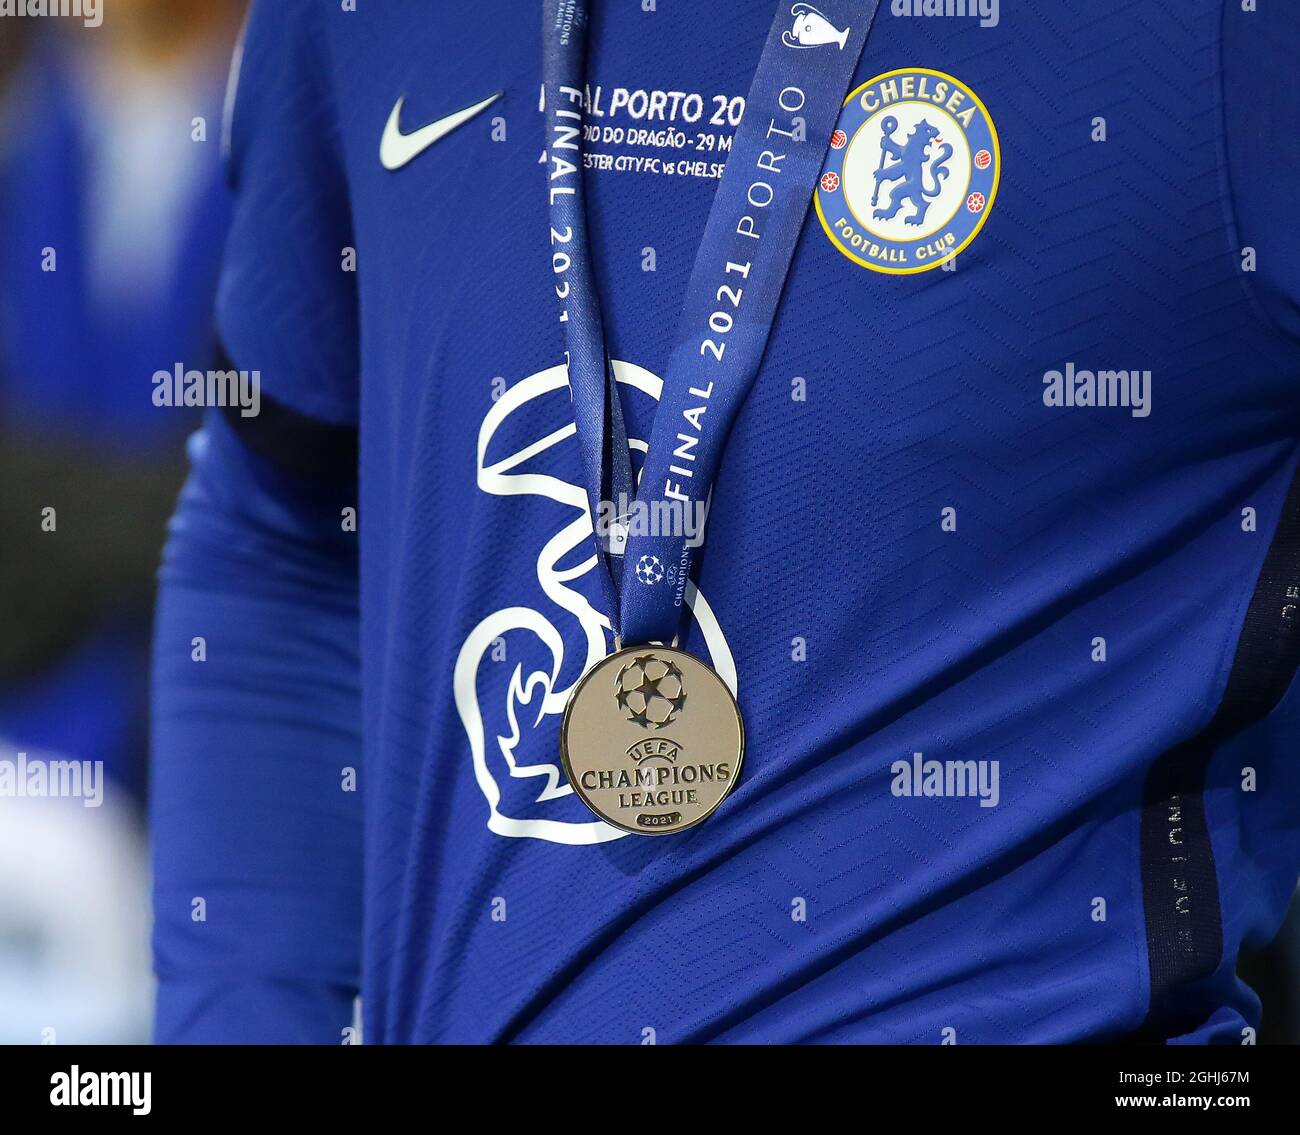 Porto, Portugal, 29th May 2021. A winners medal during the UEFA Champions  League match at the